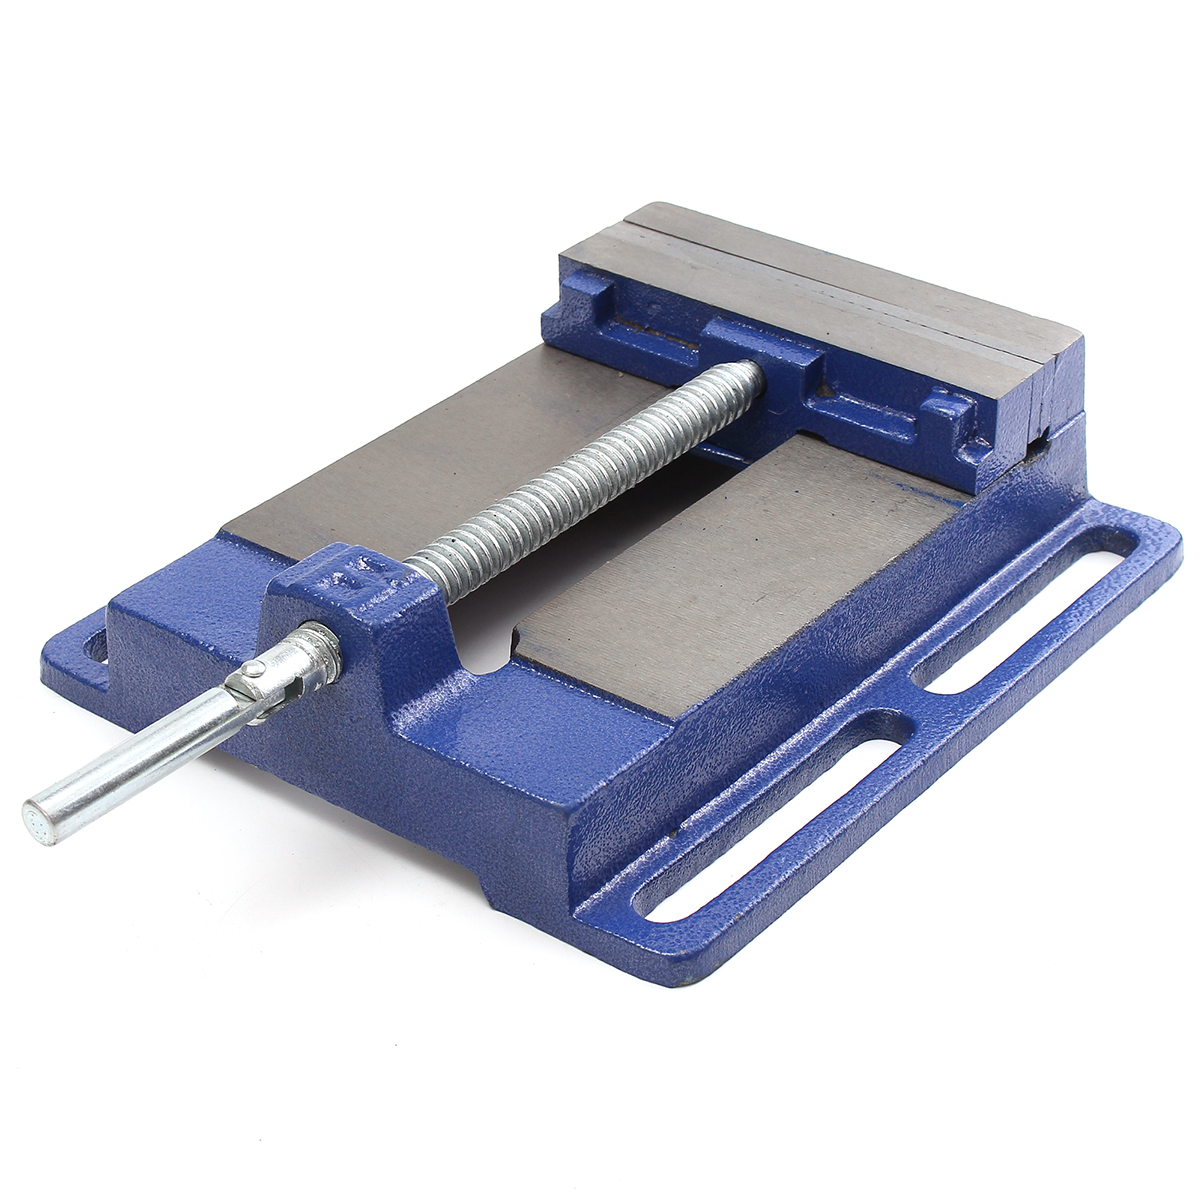 Find 6 Inch Heavy Duty JAW Drill Press Vice Bench Clamp Woodworking Drilling for Sale on Gipsybee.com with cryptocurrencies